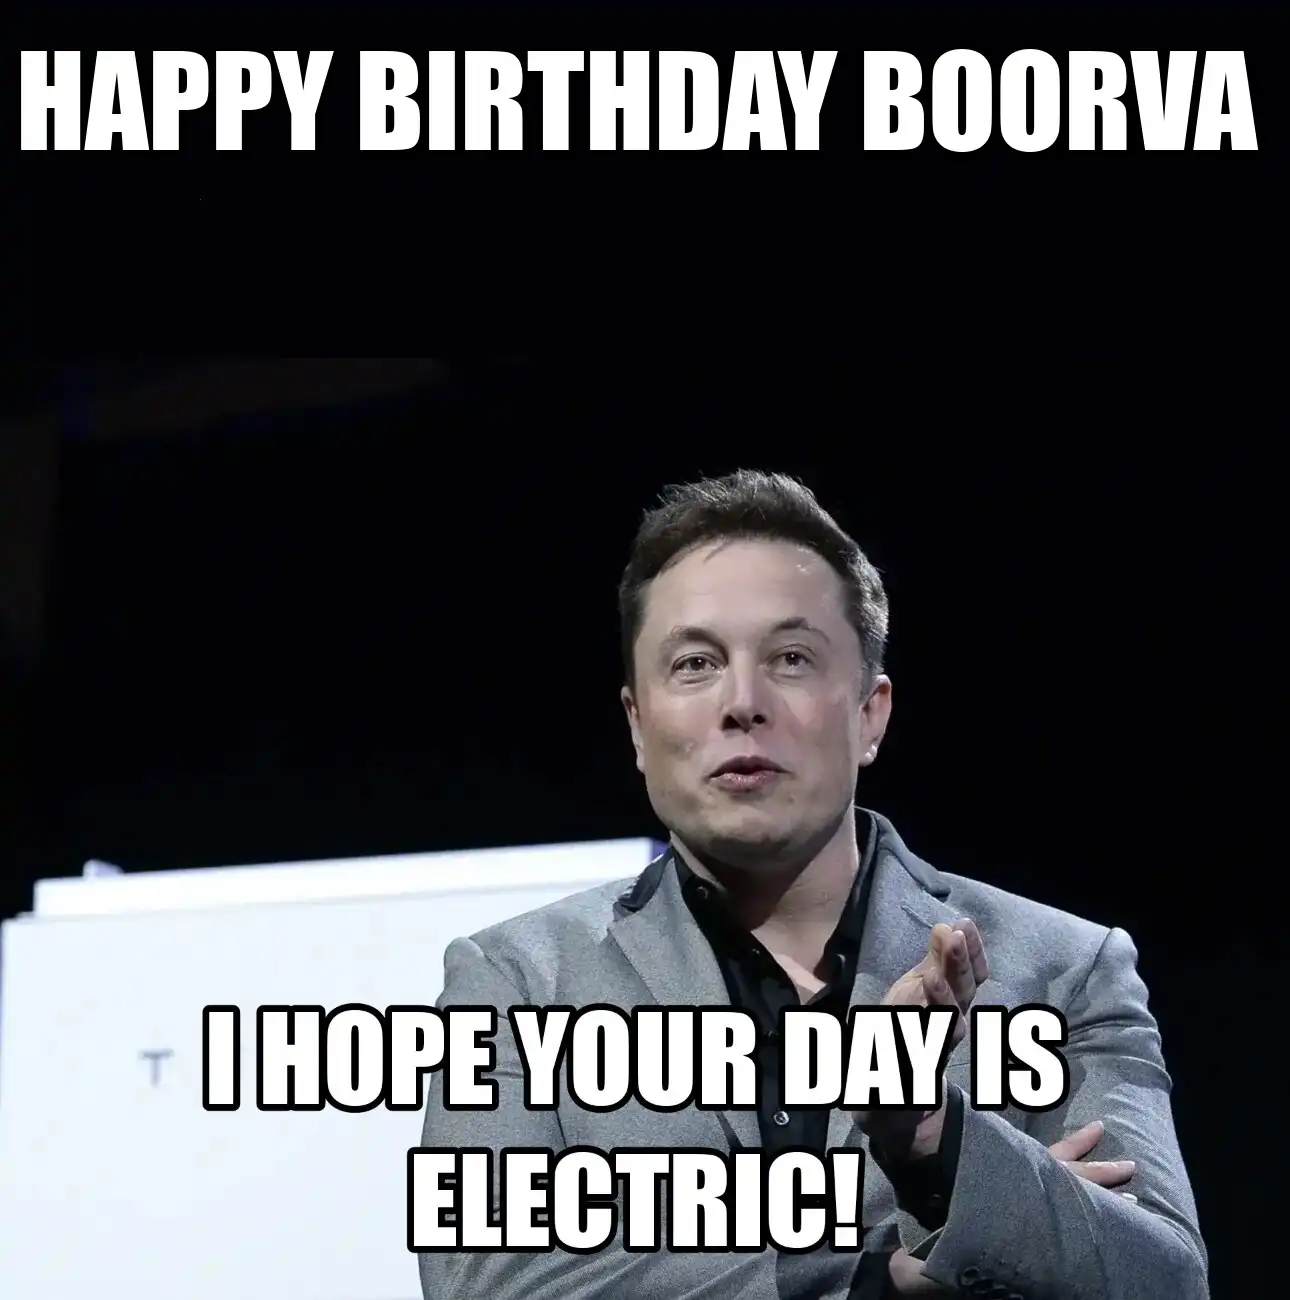 Happy Birthday Boorva I Hope Your Day Is Electric Meme